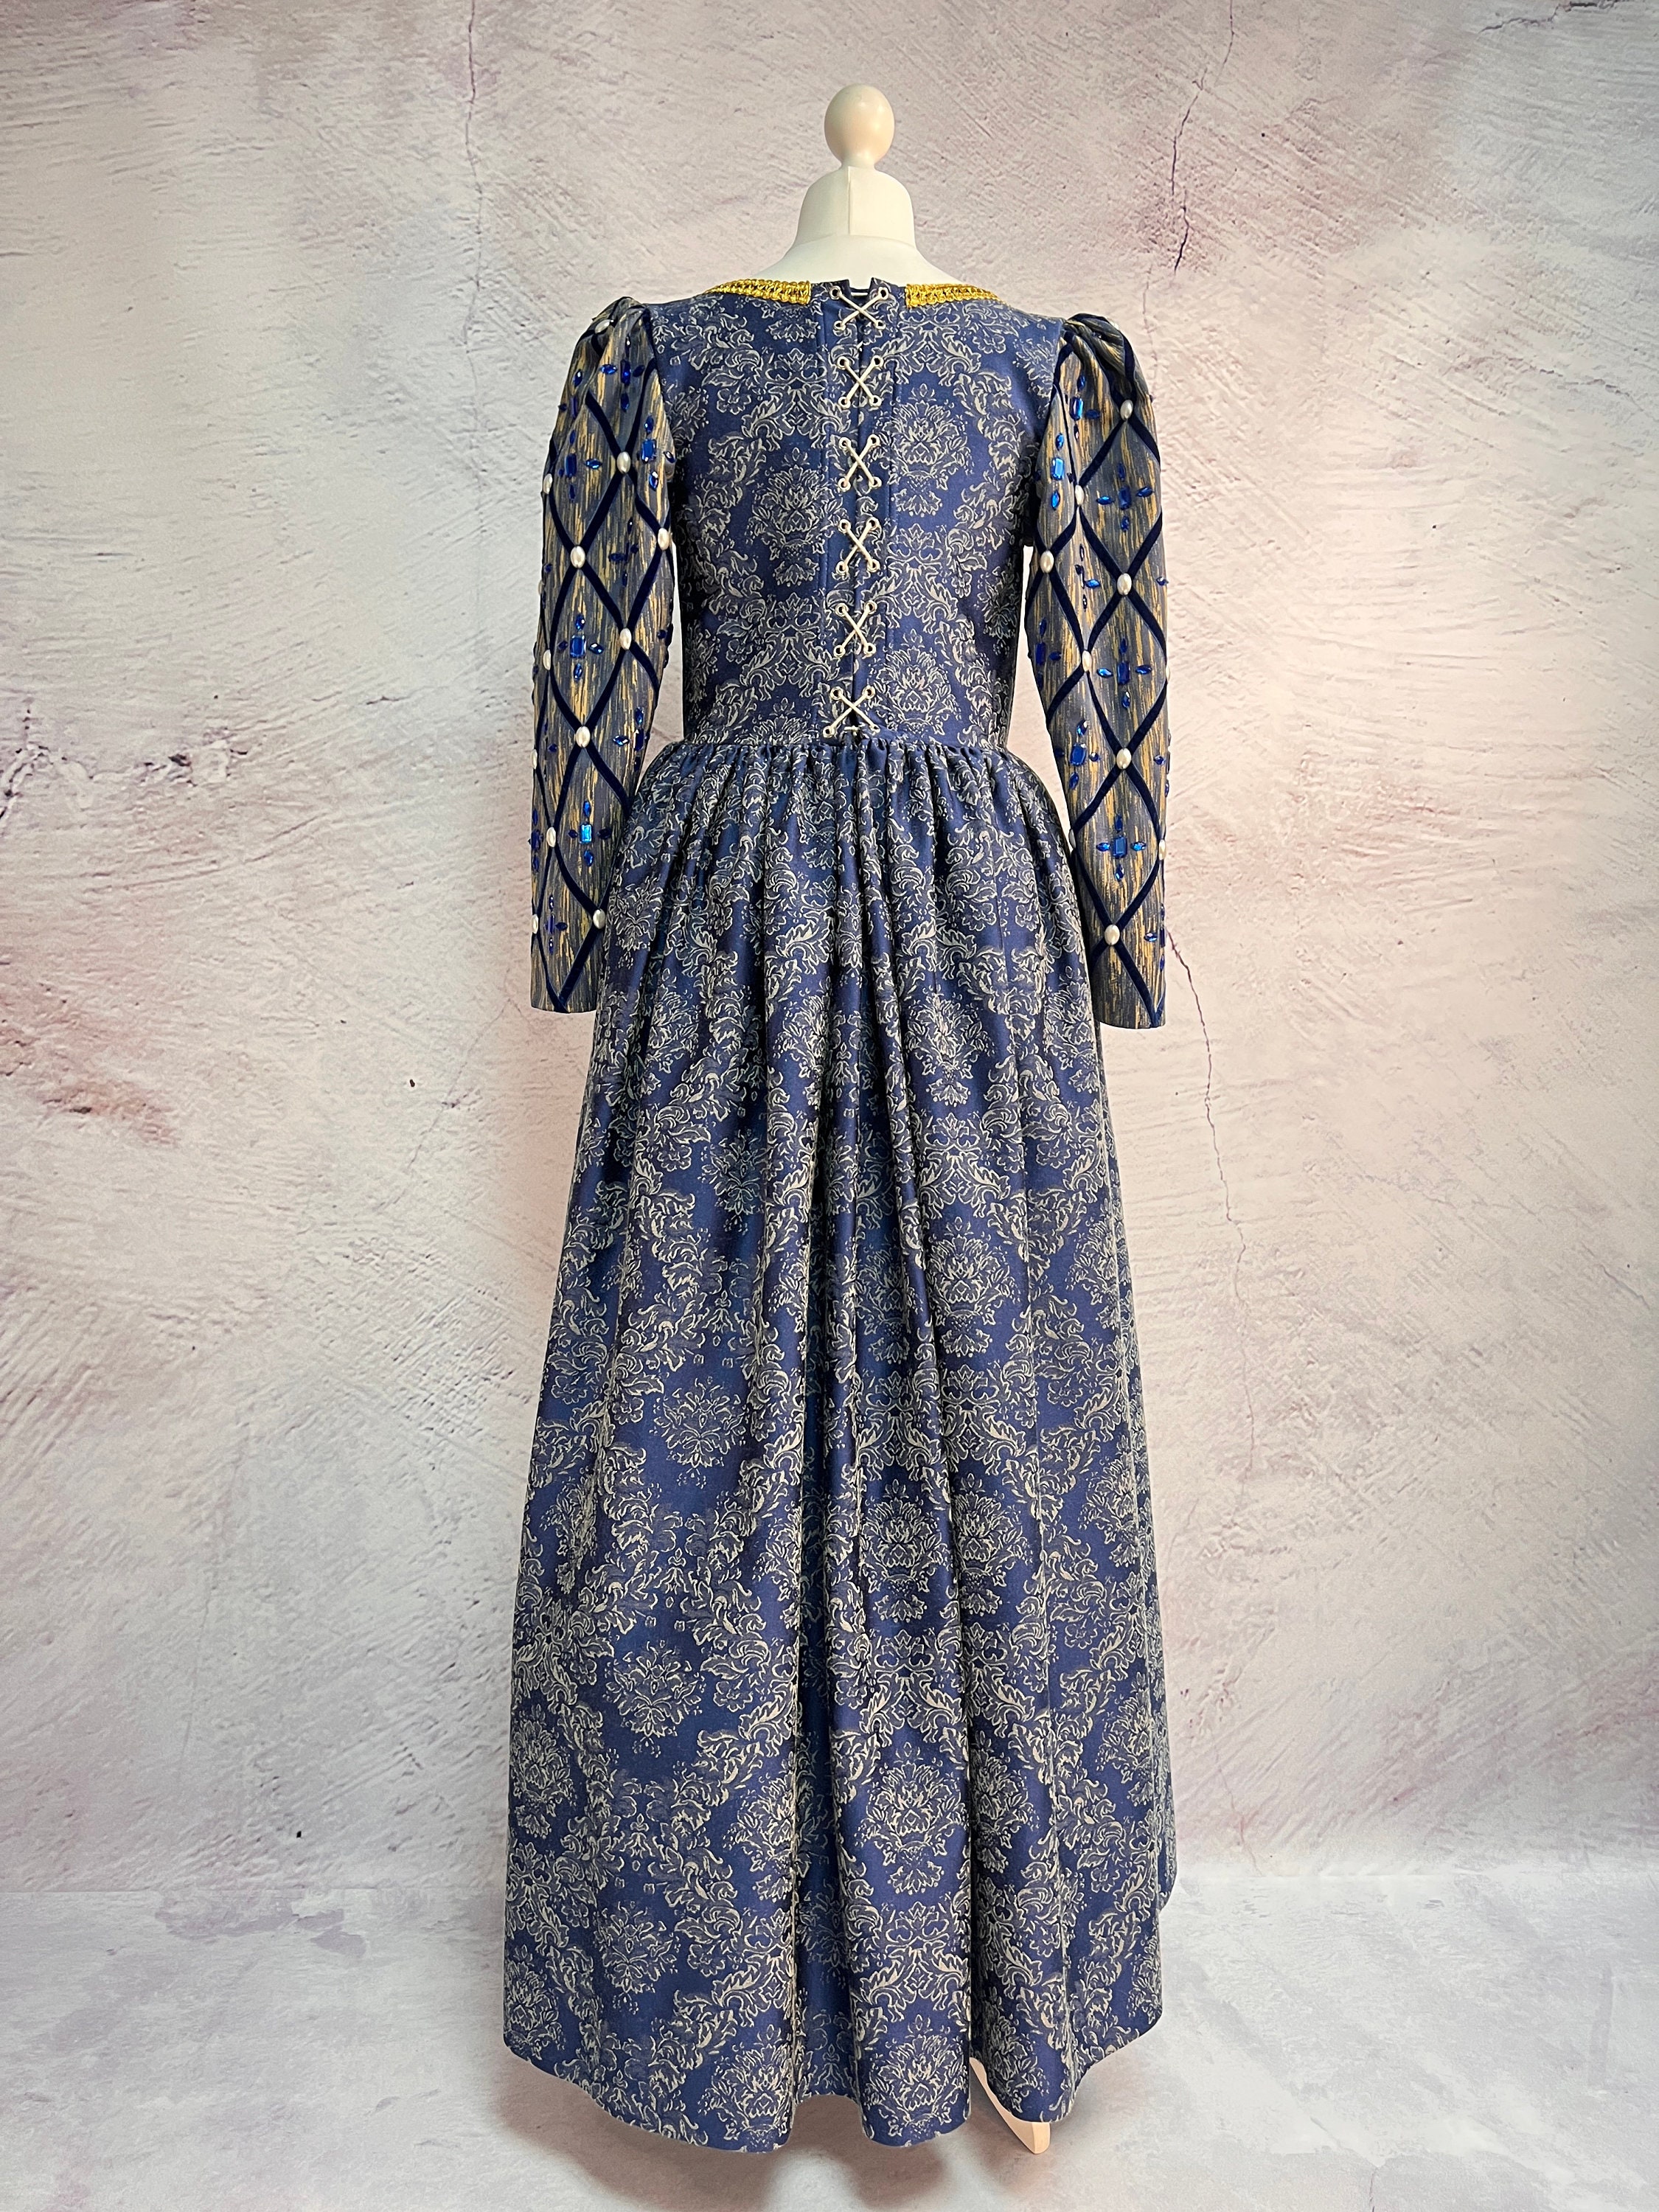 A Renaissance Dress High Quality Handmade in the Style of - Etsy